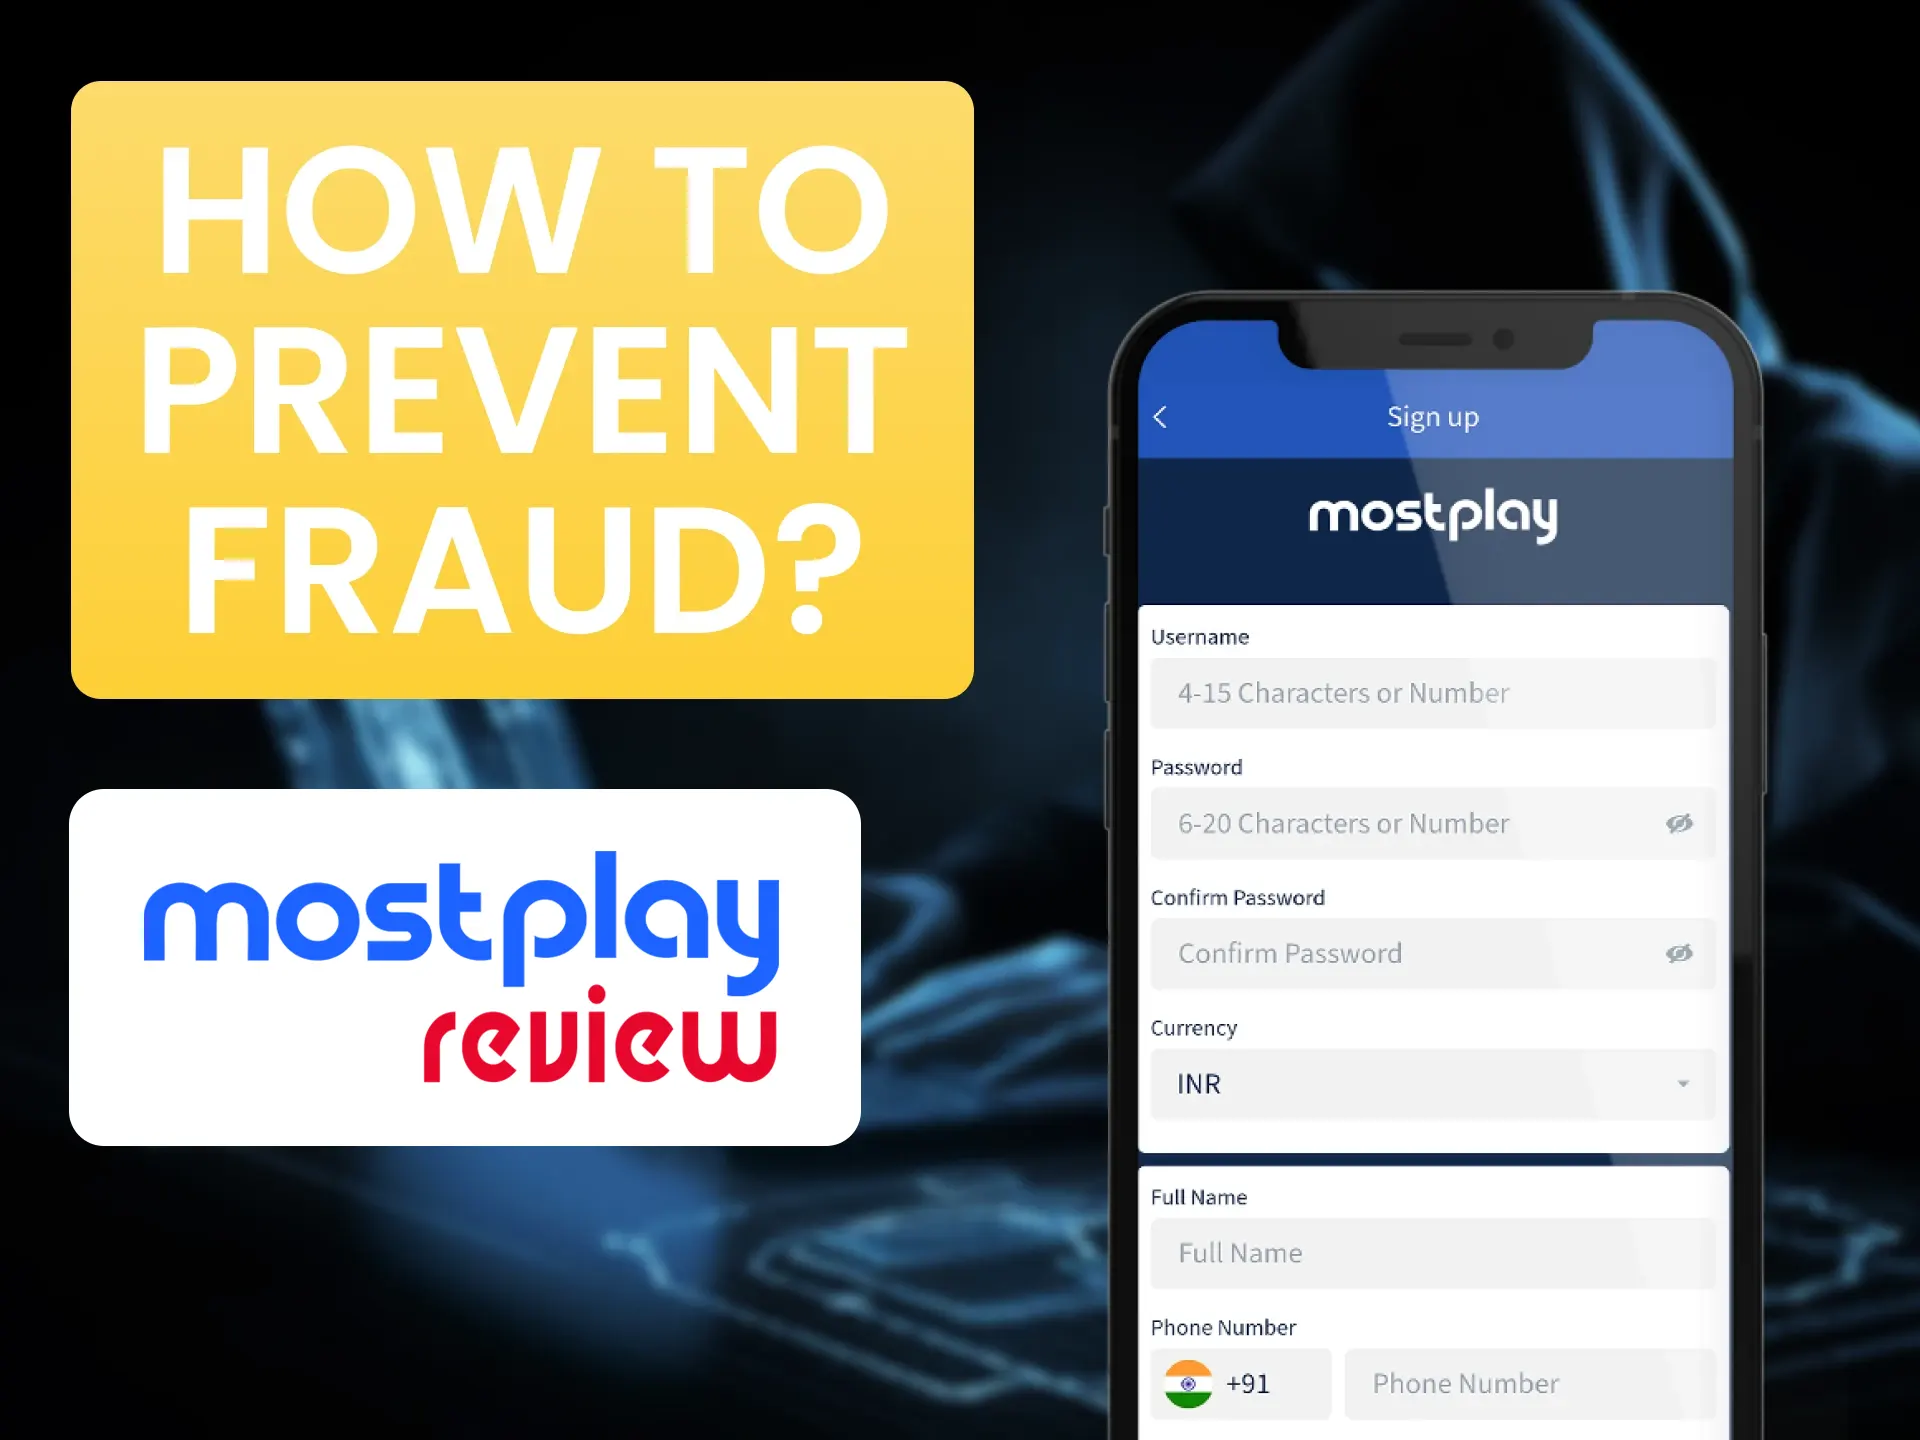 Prevent fraud at Mostplay by using helpful tips.